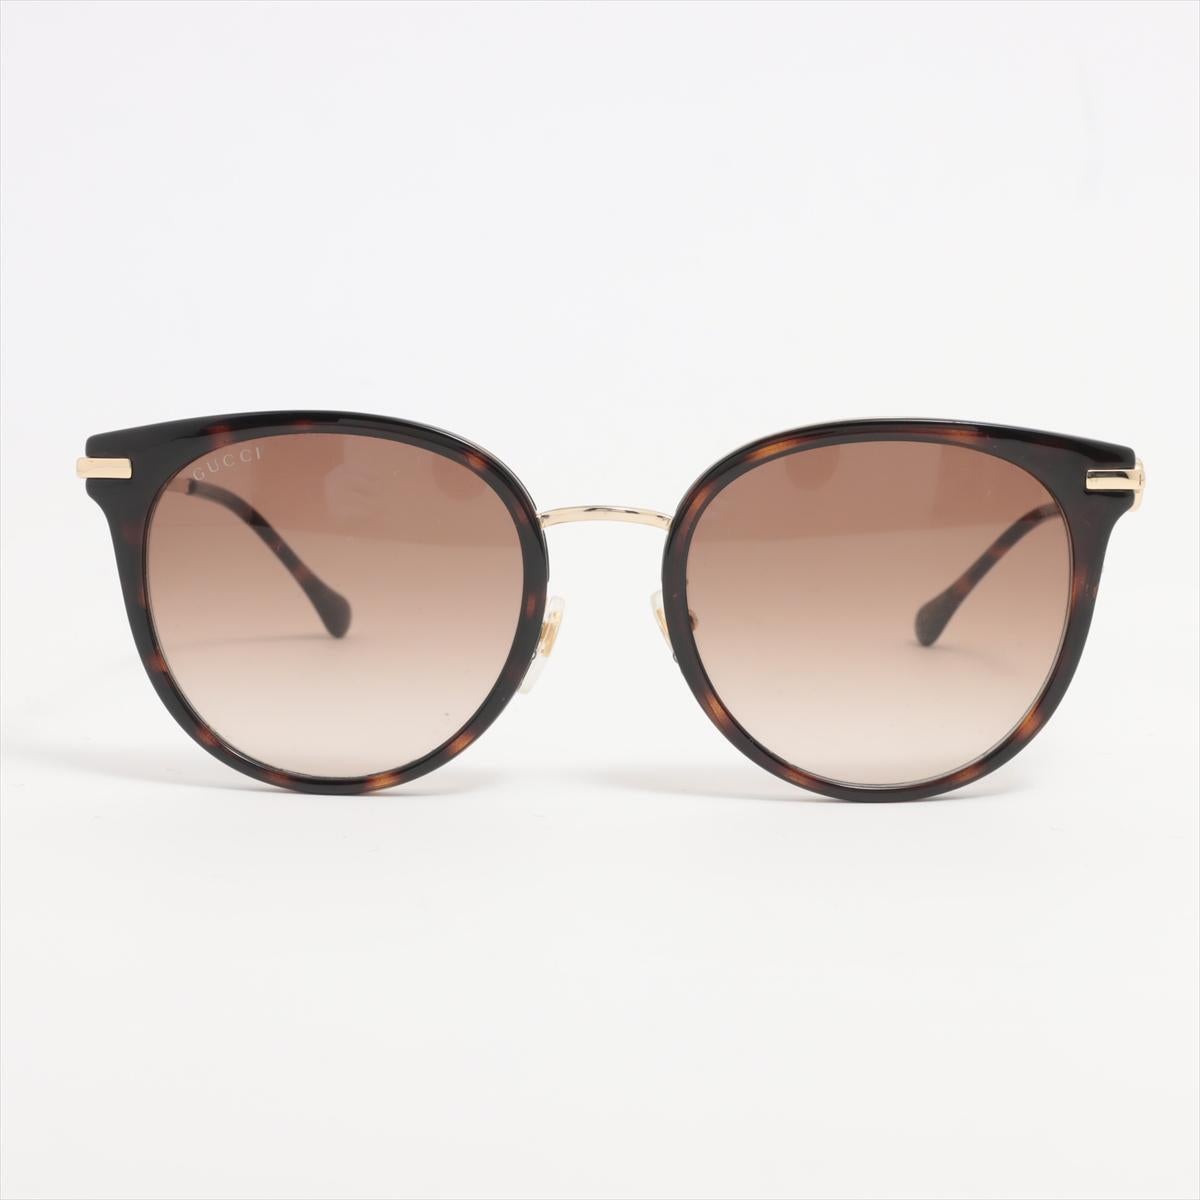 The Gucci Cat Eye Horsebit Brown Sunglasses are a stylish and sophisticated accessory that exudes luxury and glamour. Featuring a classic cat-eye silhouette, the sunglasses are adorned with the iconic Gucci Horsebit detail on the temples, adding a